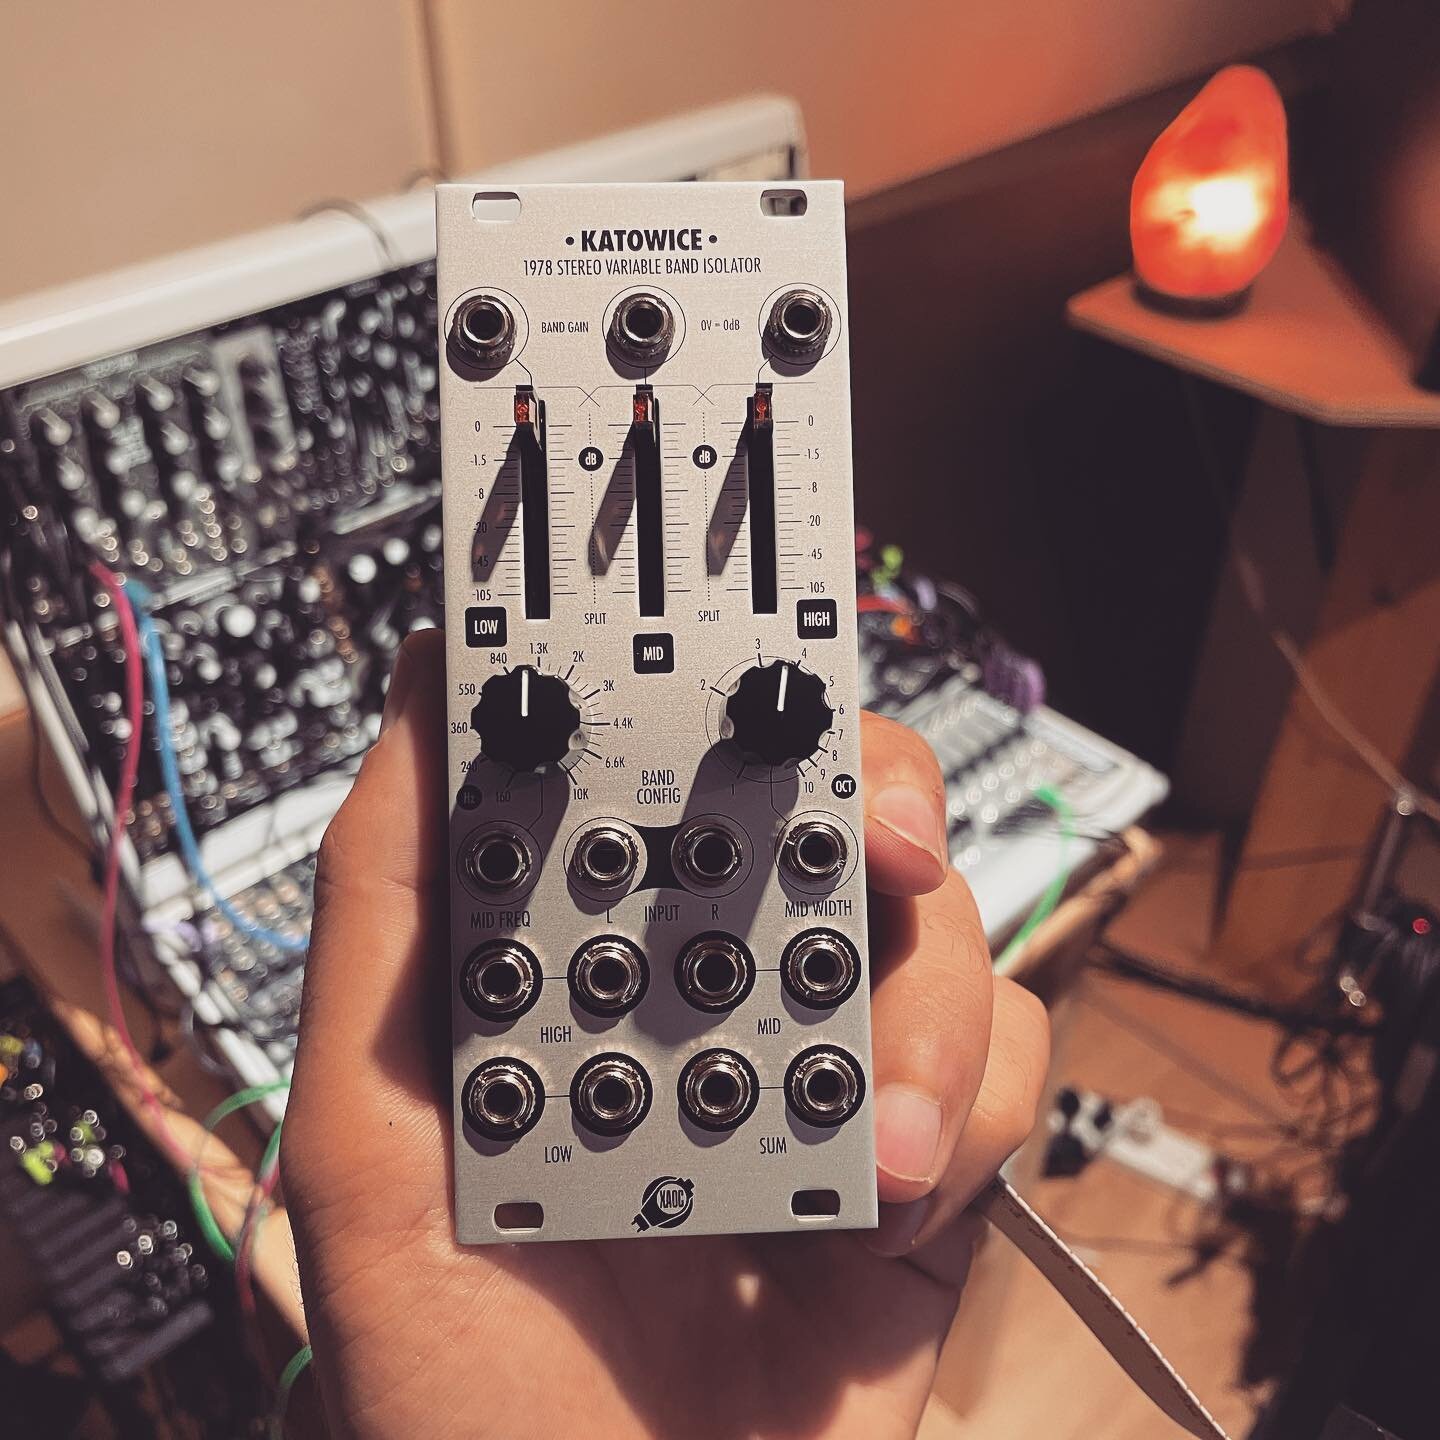 Well&hellip;. This thing is a beast. Using it as a sound designer tool by modulating almost everything here, or! Using it as a stereo low end SC tool.

#xaocdeviceskatowice #xaocdevices #eurorack #modular #sounddesign